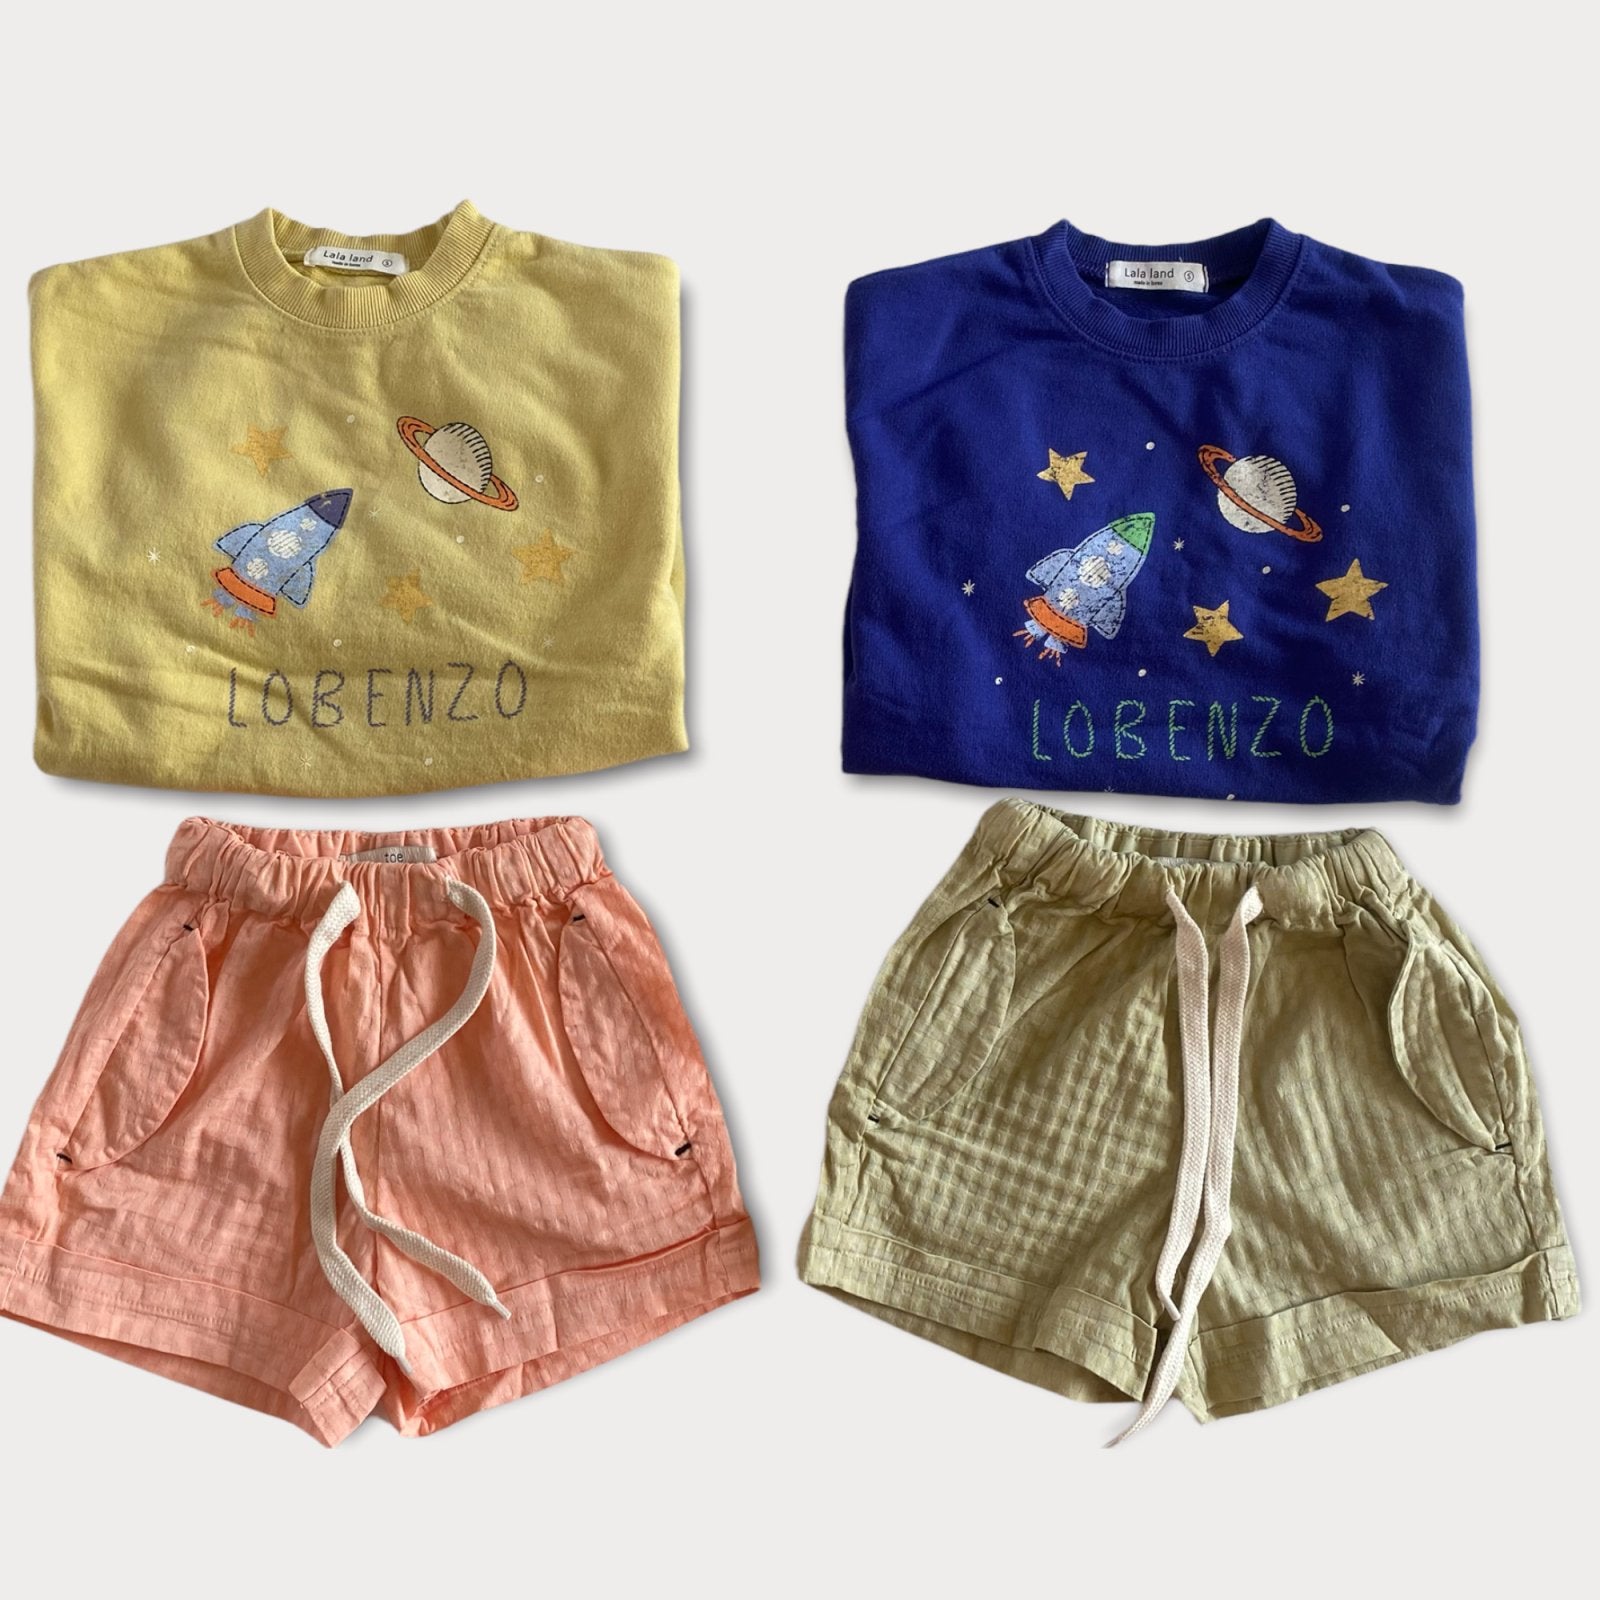 Joy Shorts find Stylish Fashion for Little People- at Little Foxx Concept Store